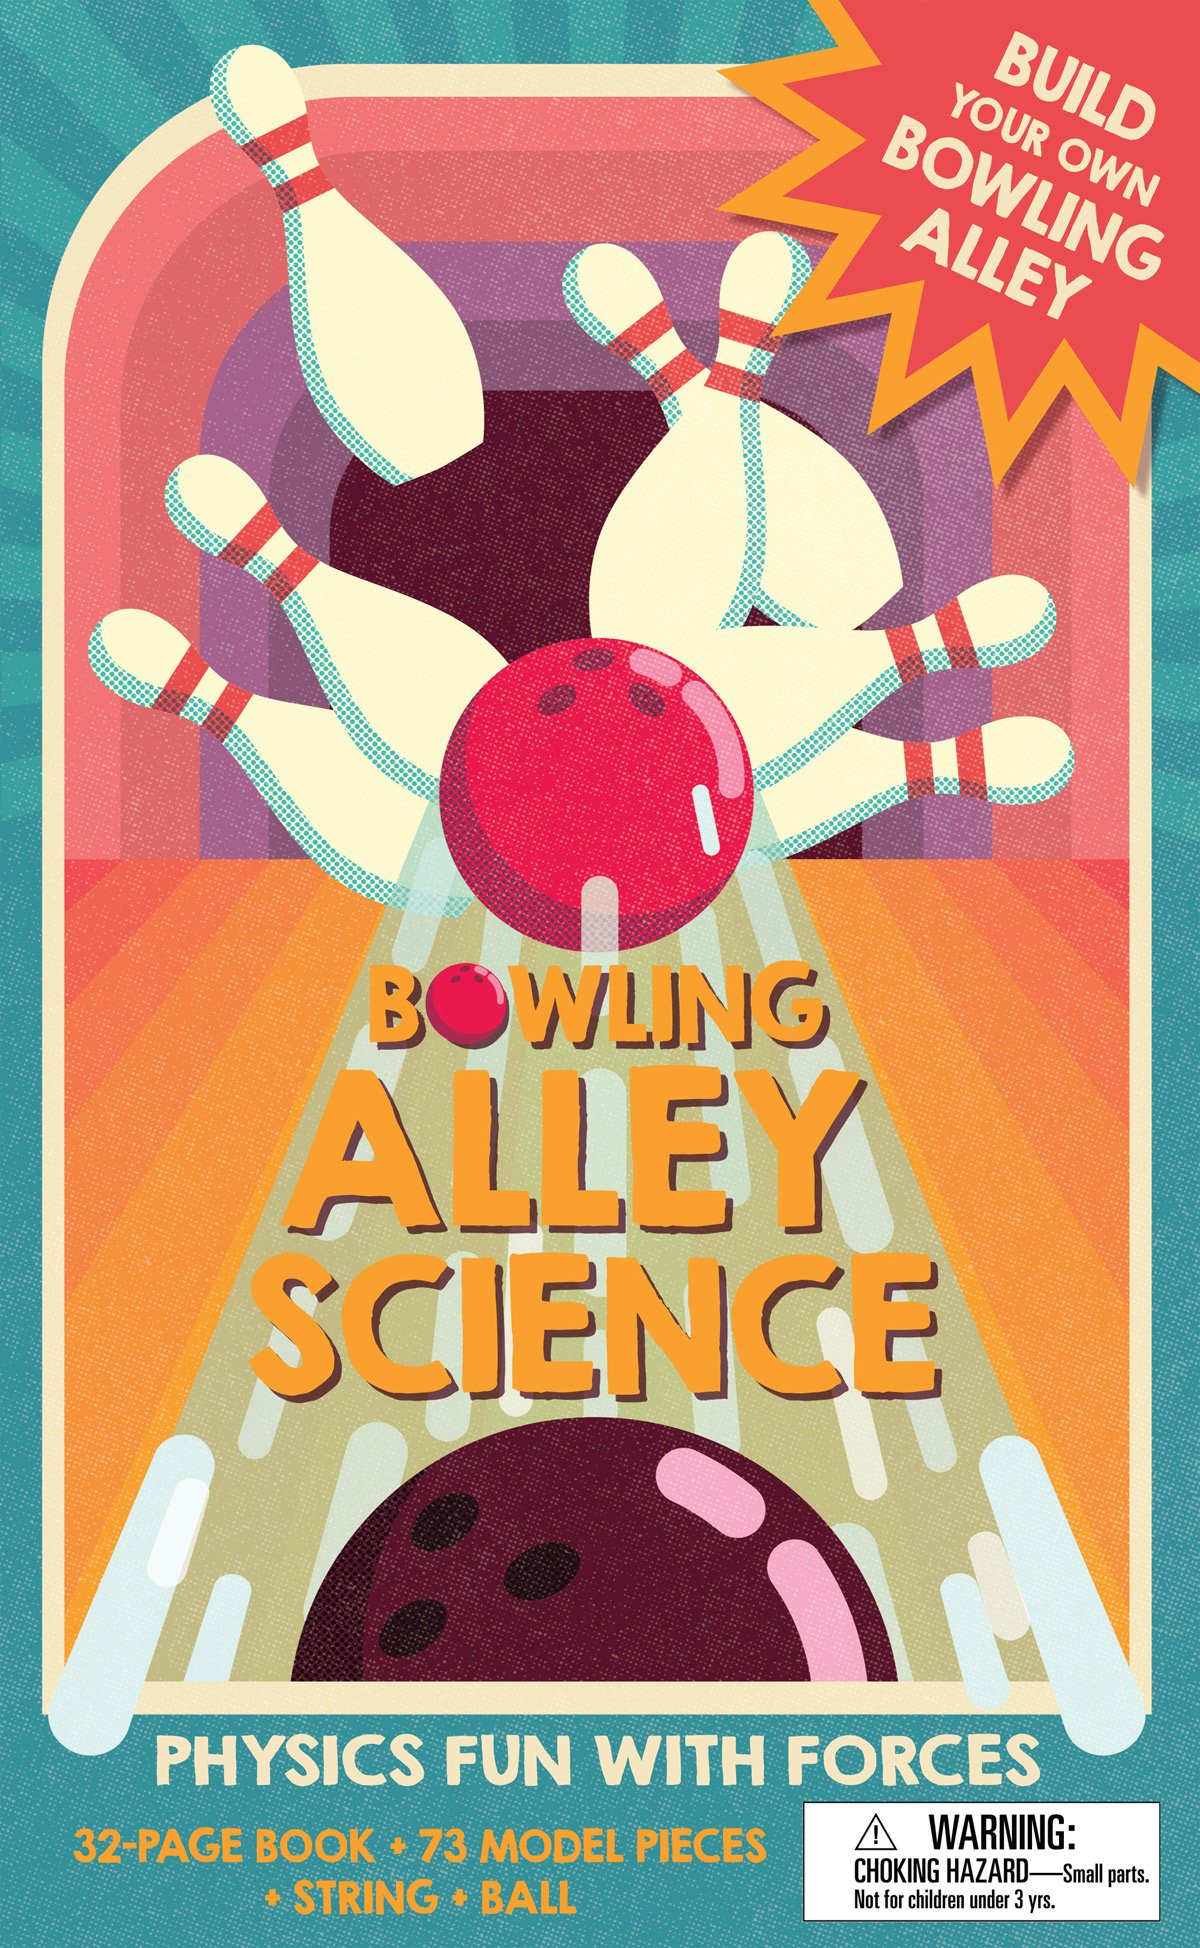 Bowling Alley Science